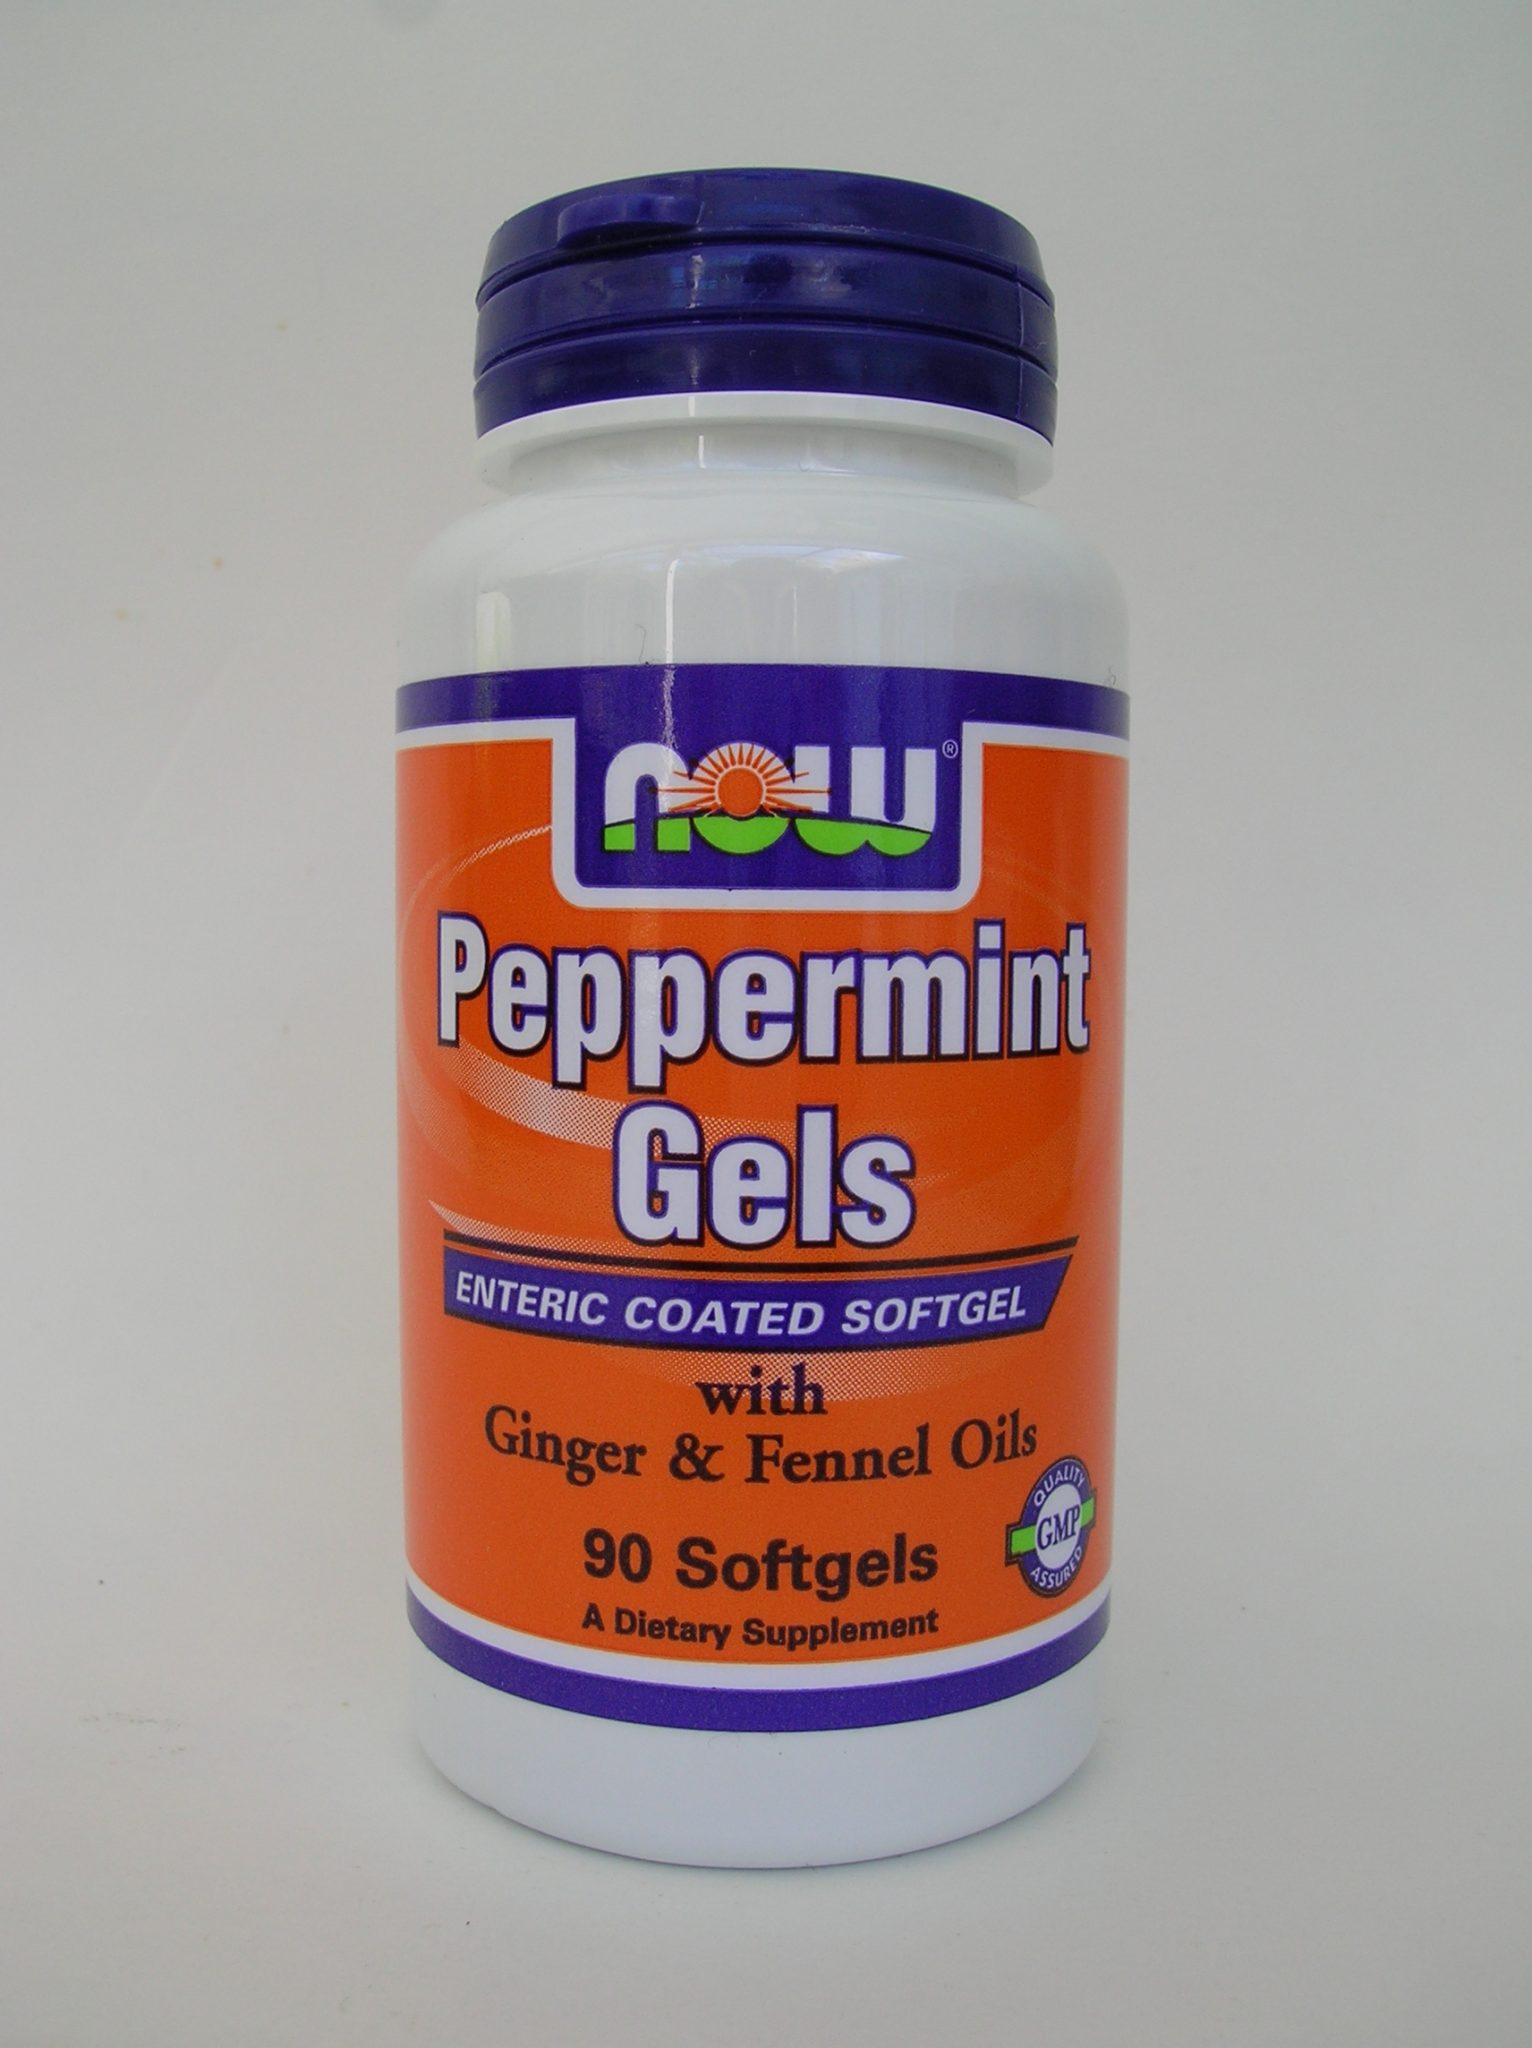 enteric coated peppermint oil benefits faps